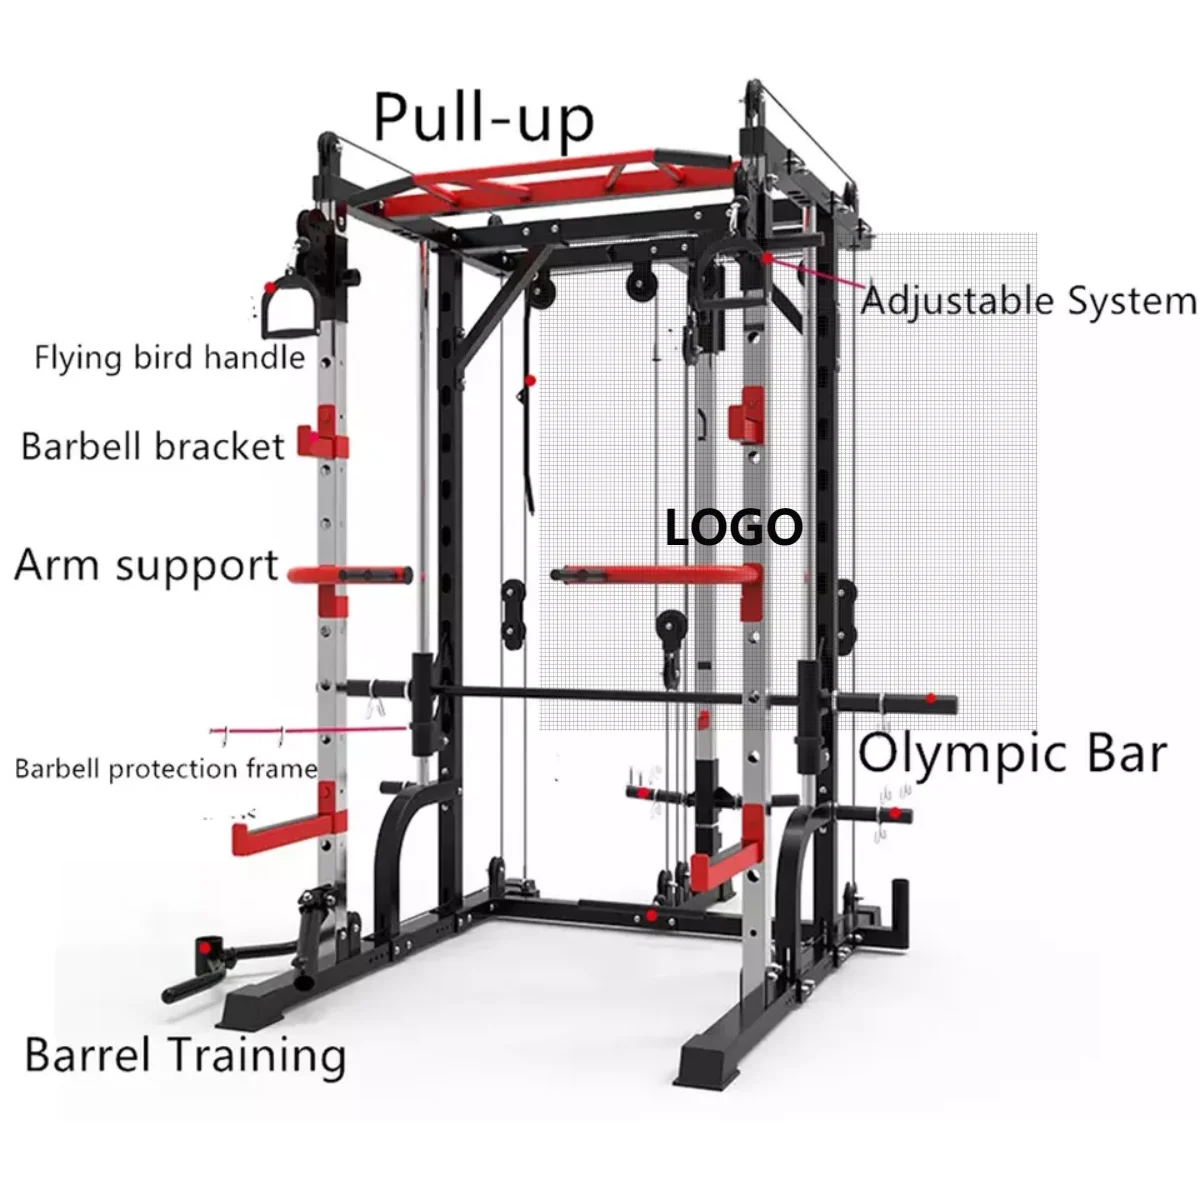 

Hot sale 2020 Body building Gym Fitness equipment Multi Functional Adjustable Squat Rack Smith Machine power rack, Black+red